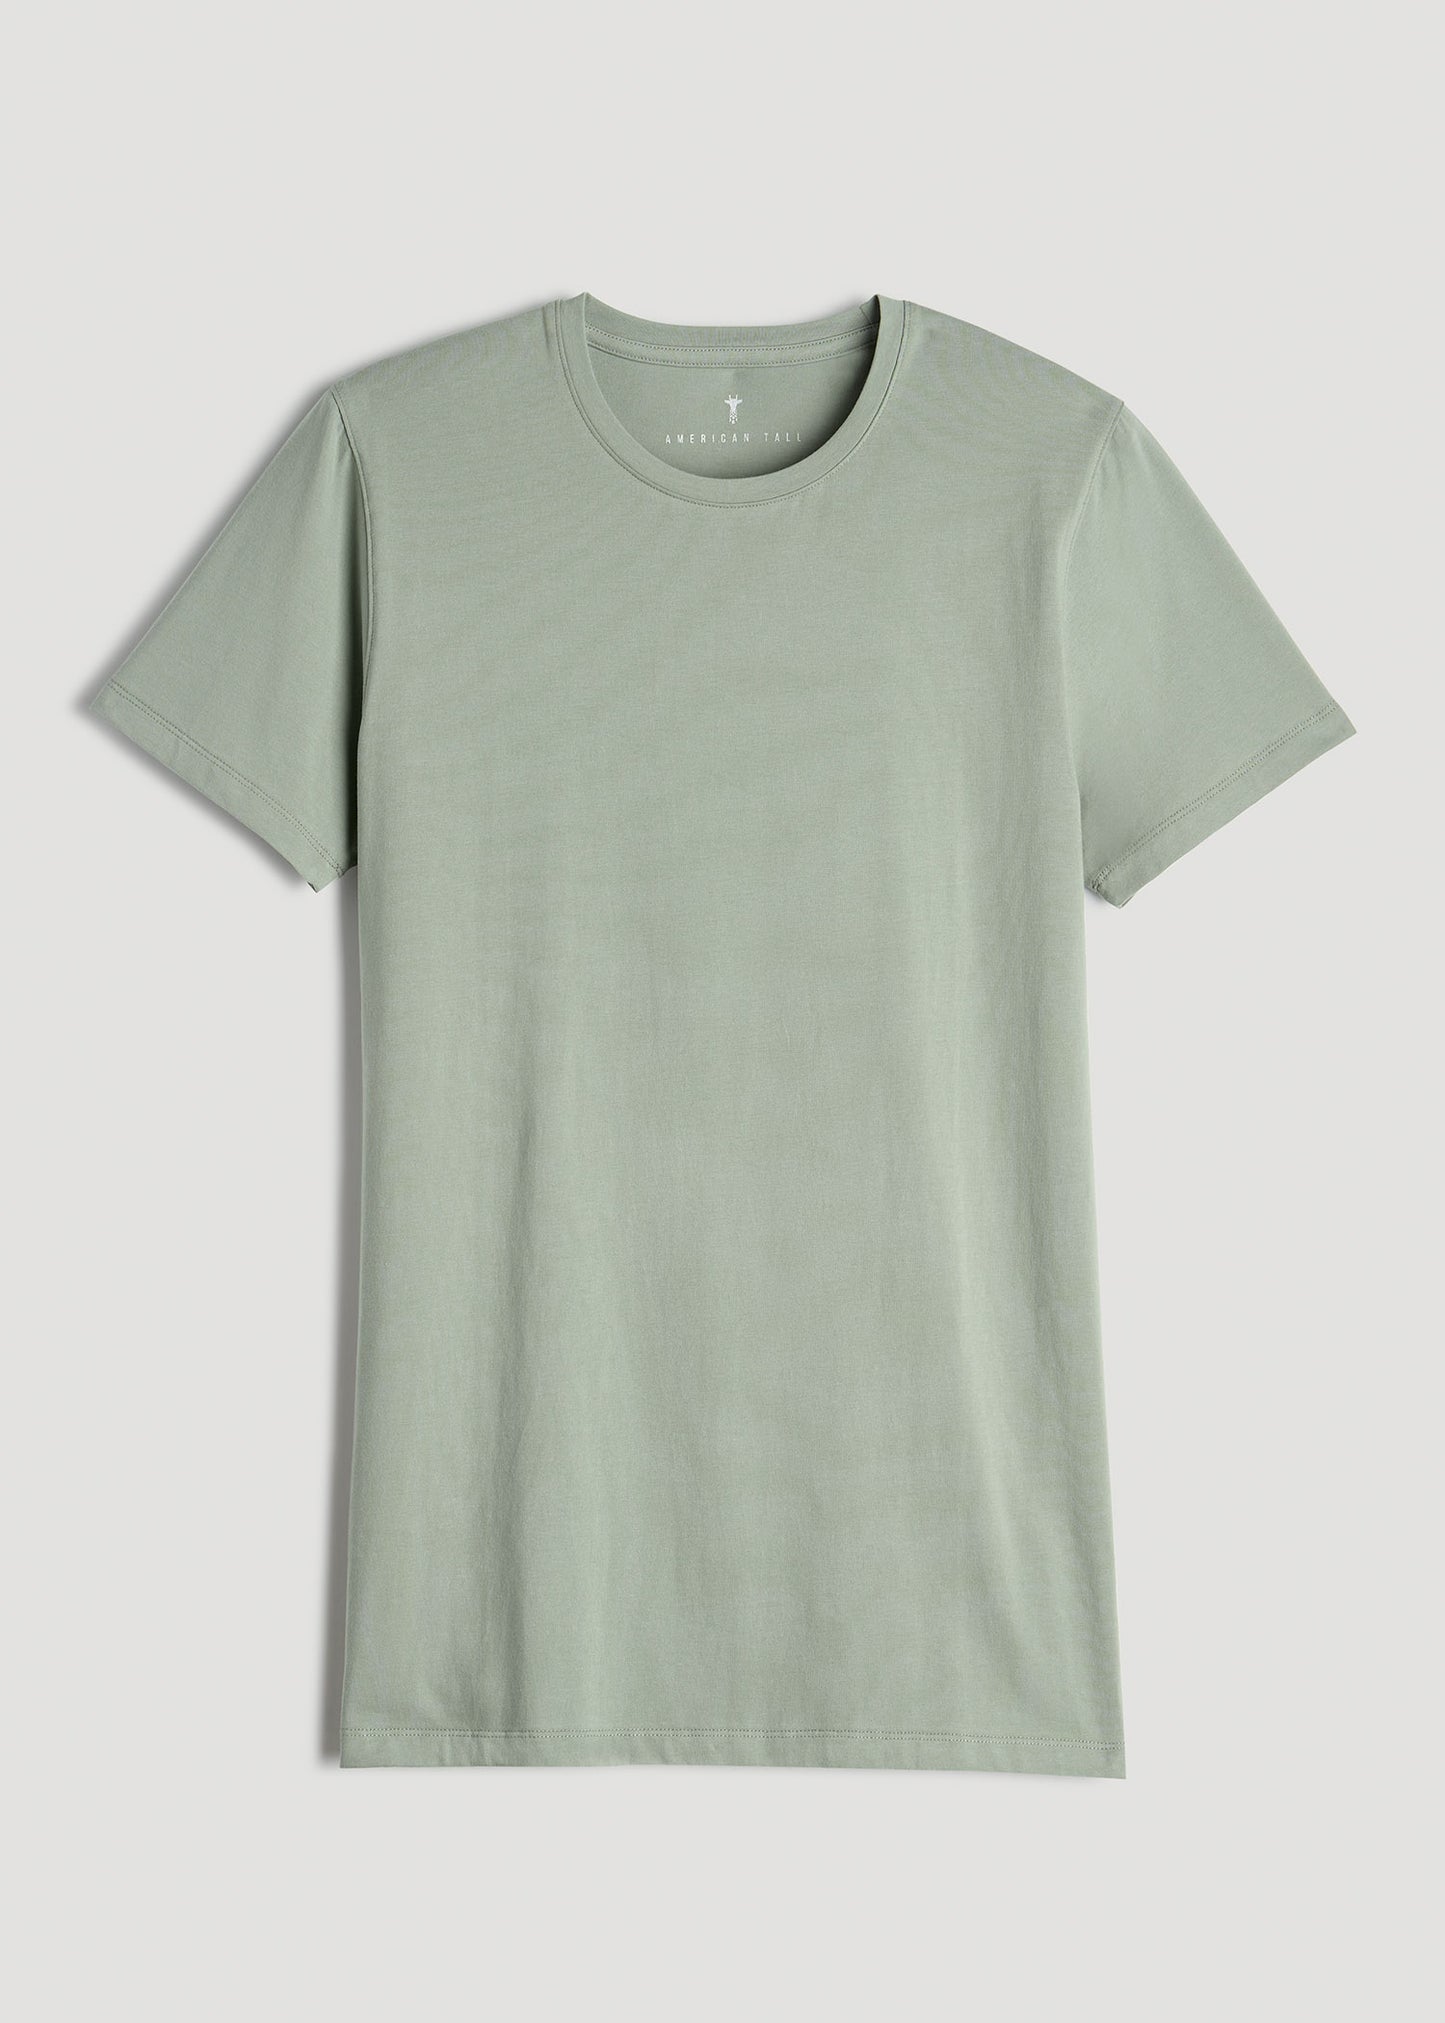 Stretch Cotton MODERN-FIT T-Shirt for Tall Men in Seagrass